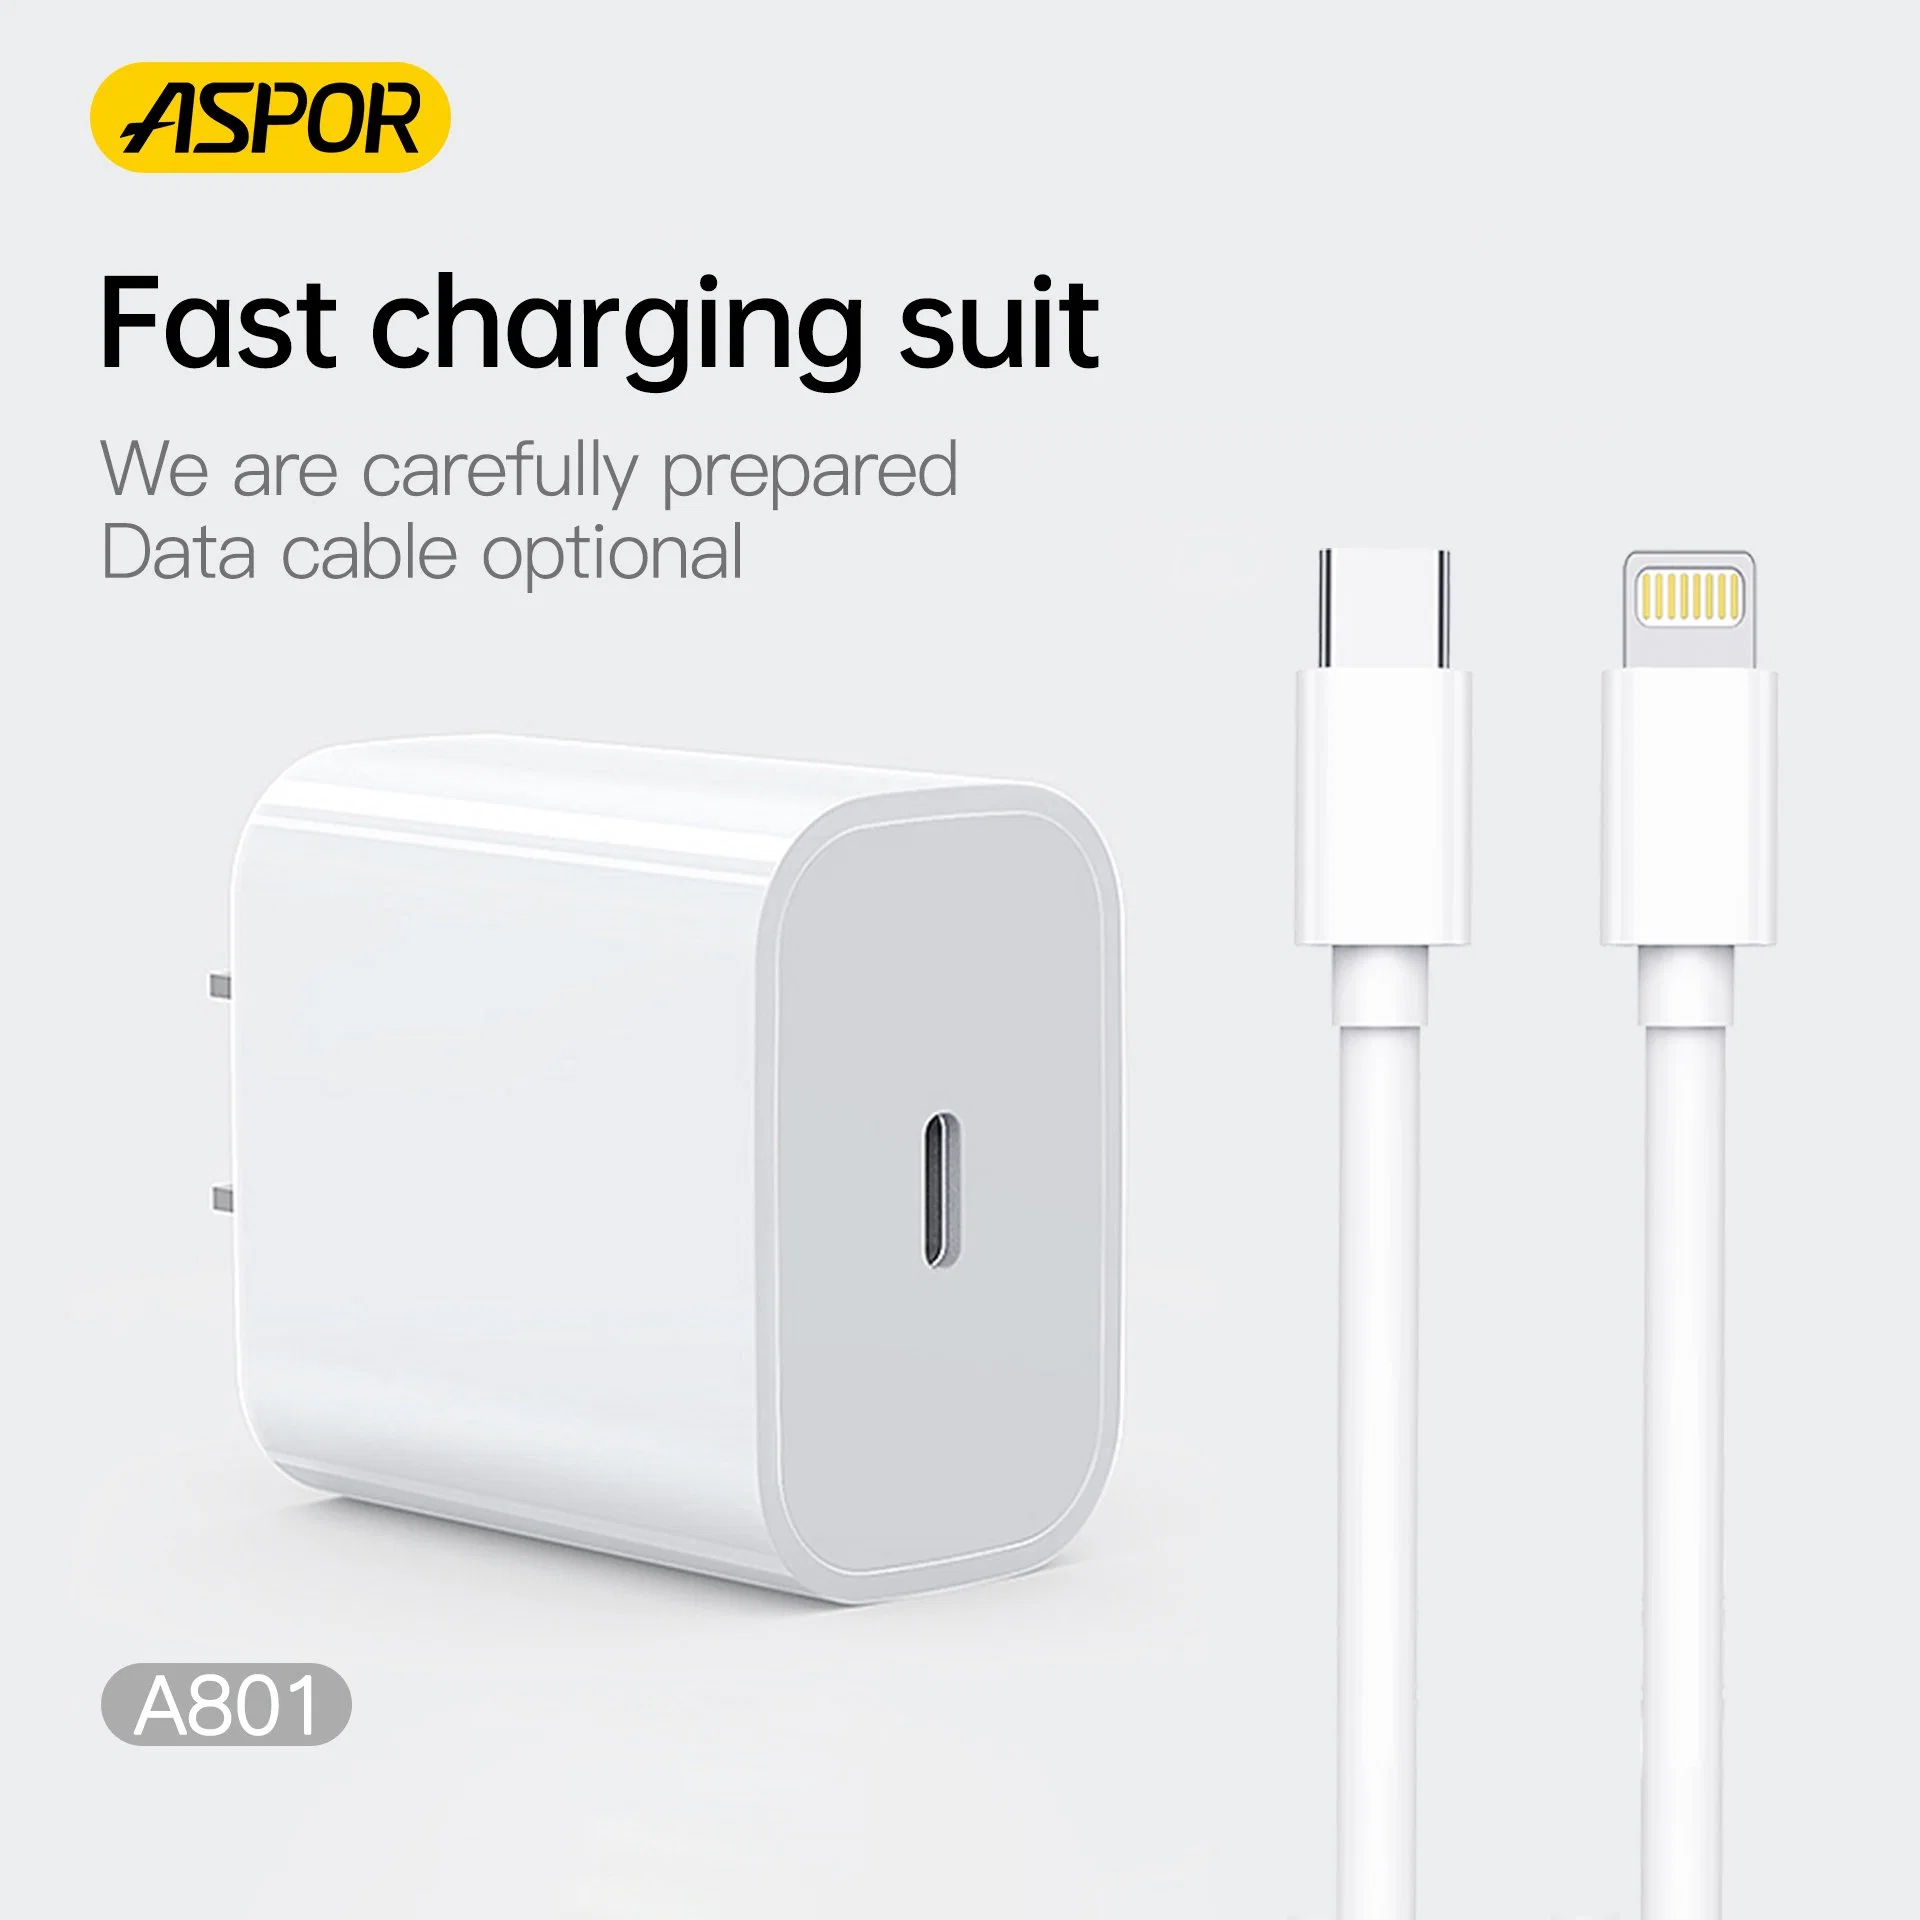 New-One-Skin-Friendly-Shell-Small-and-Portable-Charger-20W-Fast-Charging-with-1USB-Home-Charger-with-High-Quality-for-Aspor-in-China